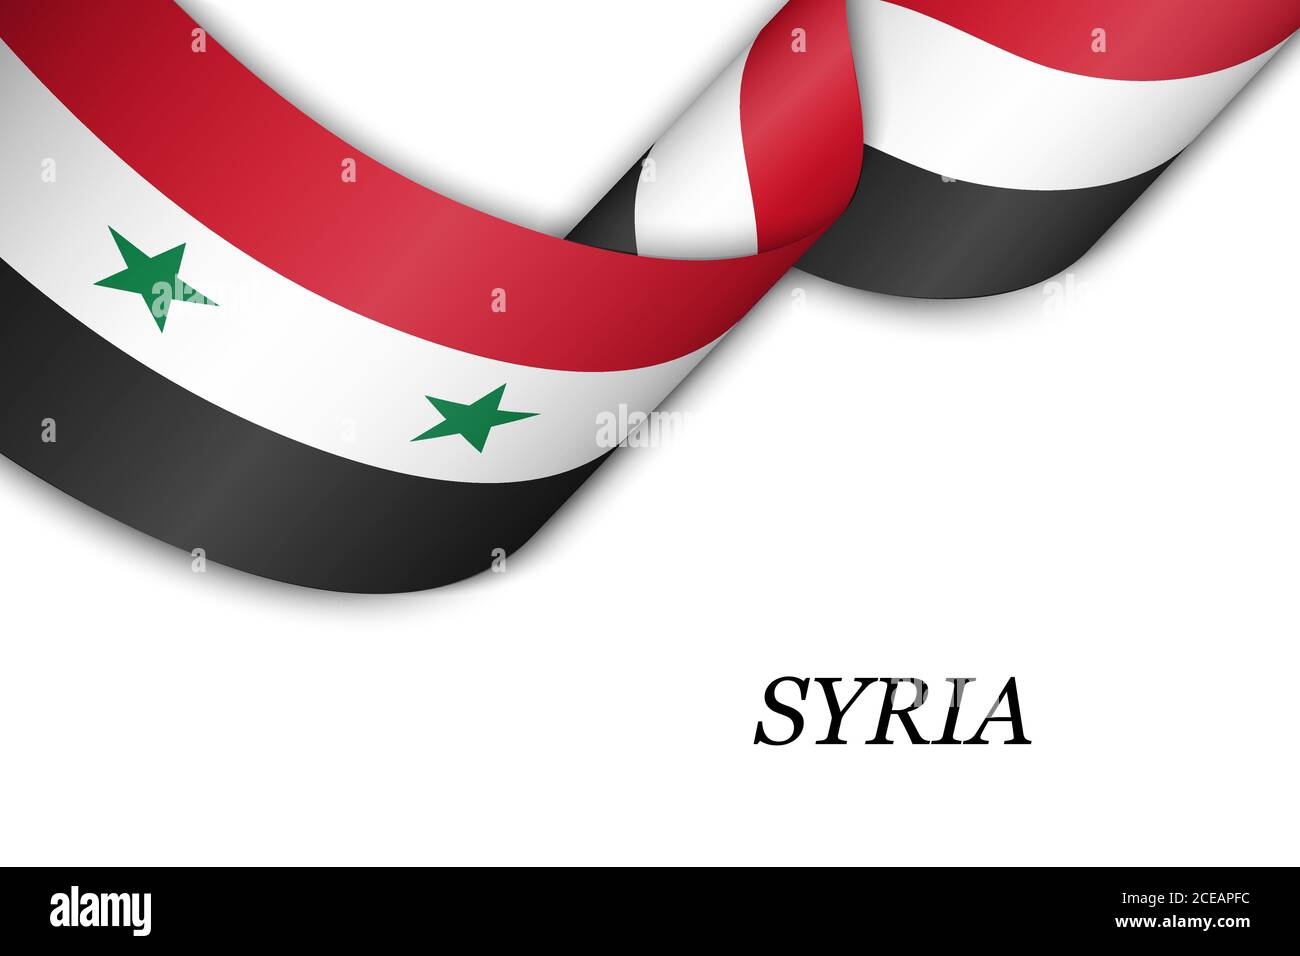 Syria border Stock Vector Images - Alamy